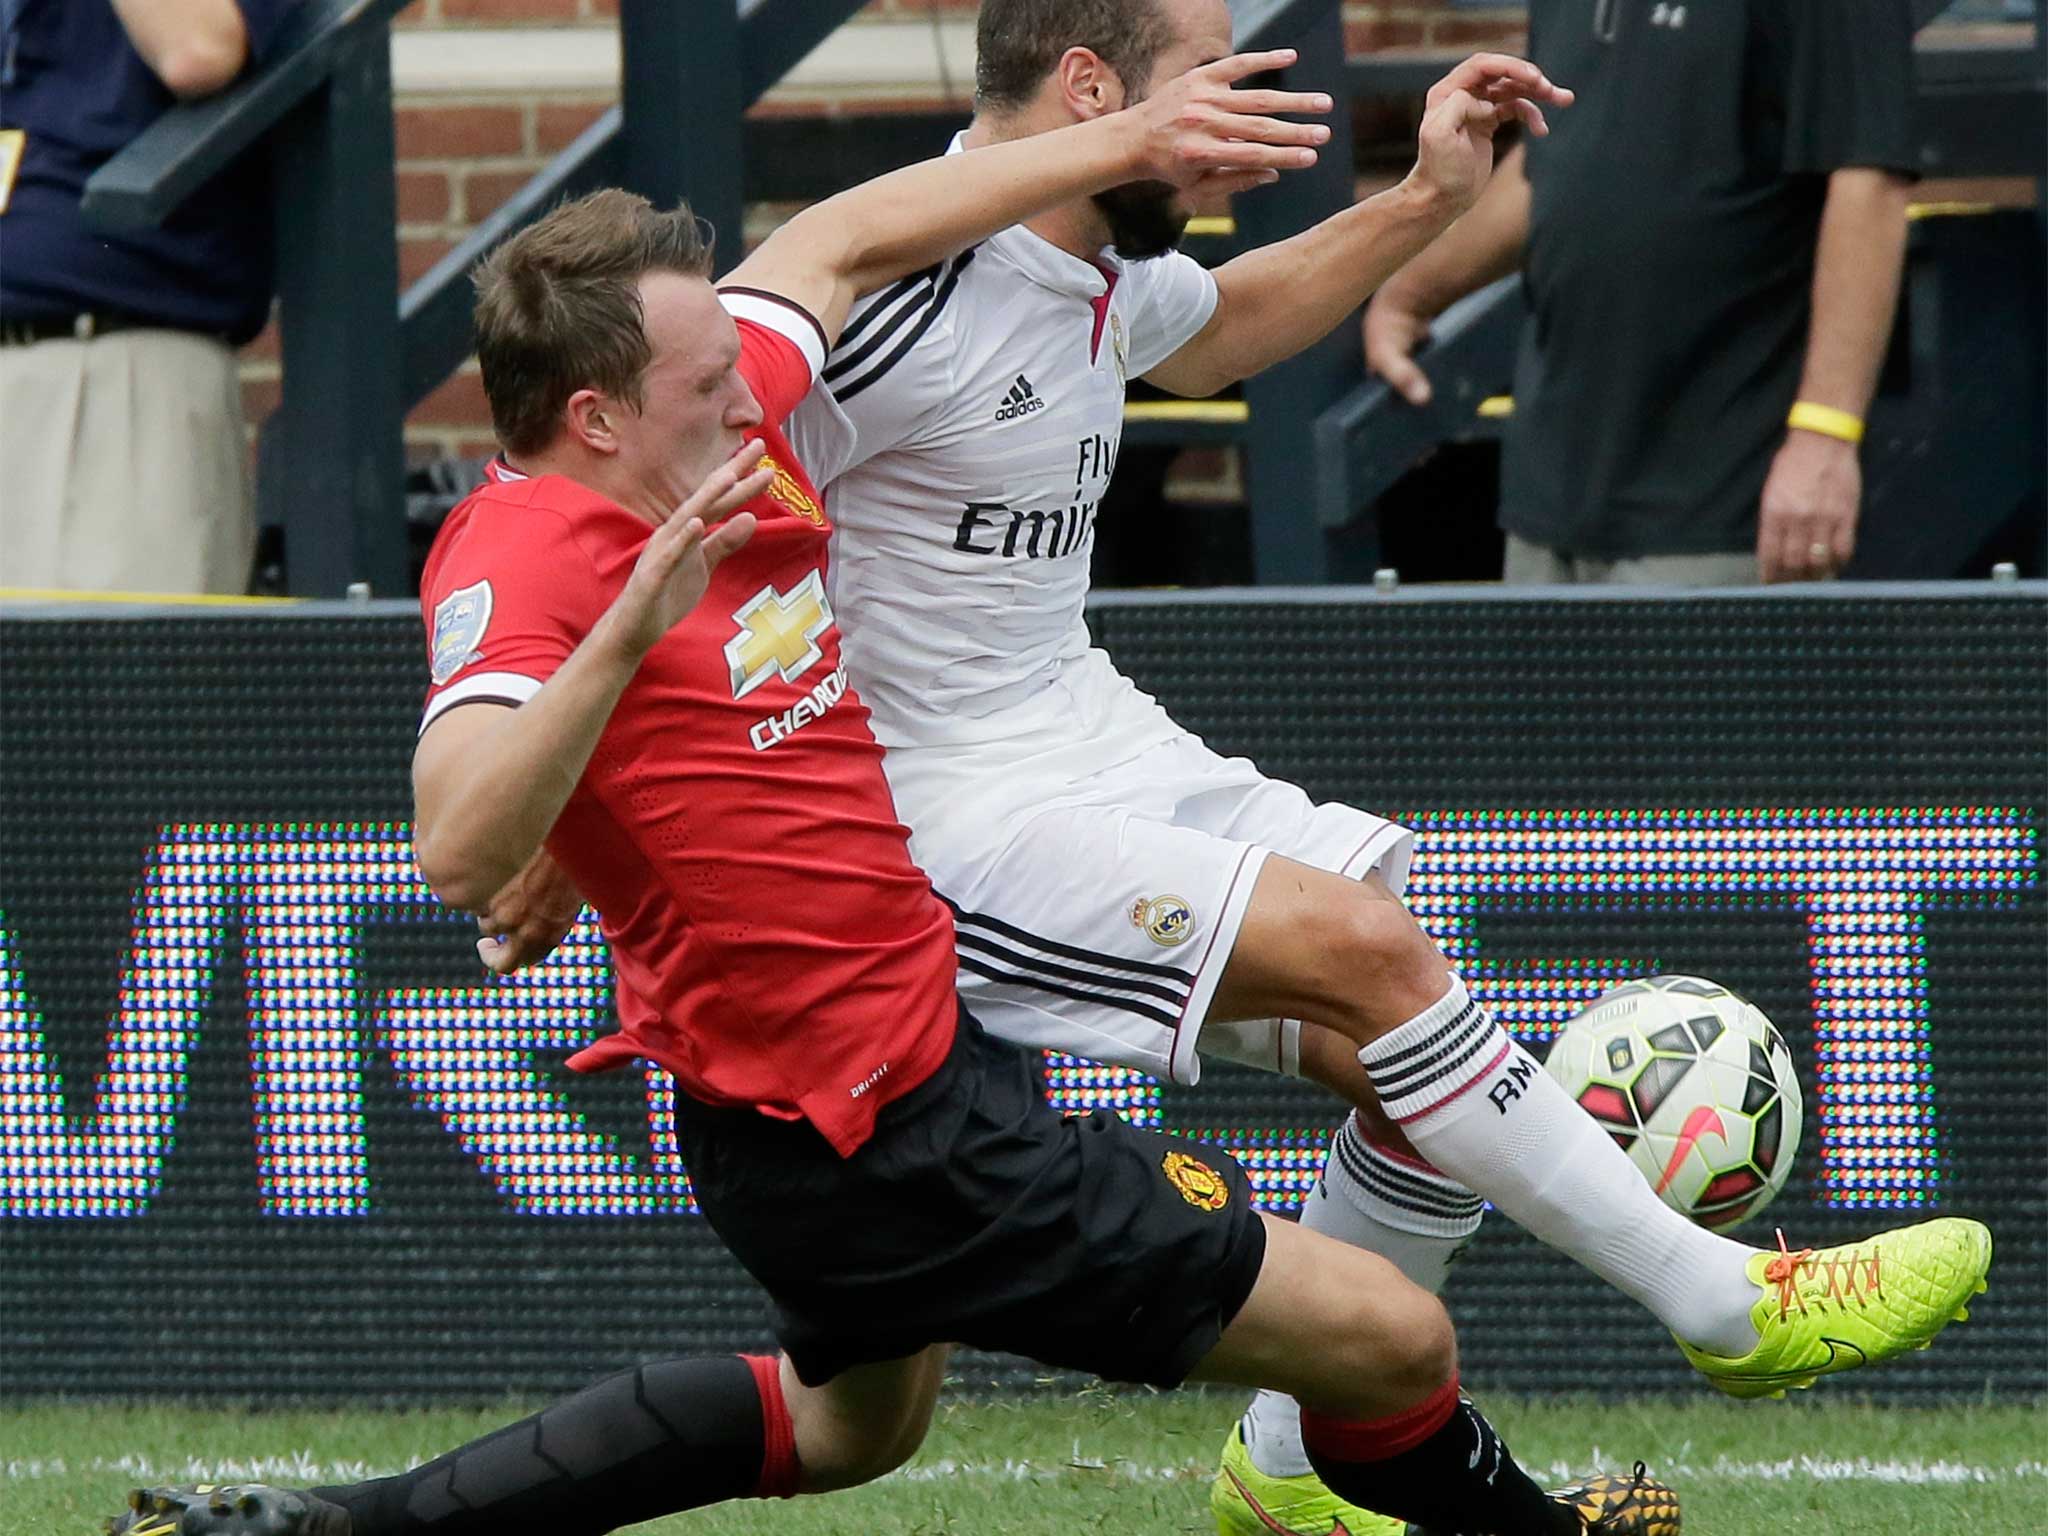 Phil Jones of Manchester United clears the ball against Dani Carvajal of Real Madrid during at Michigan Stadium